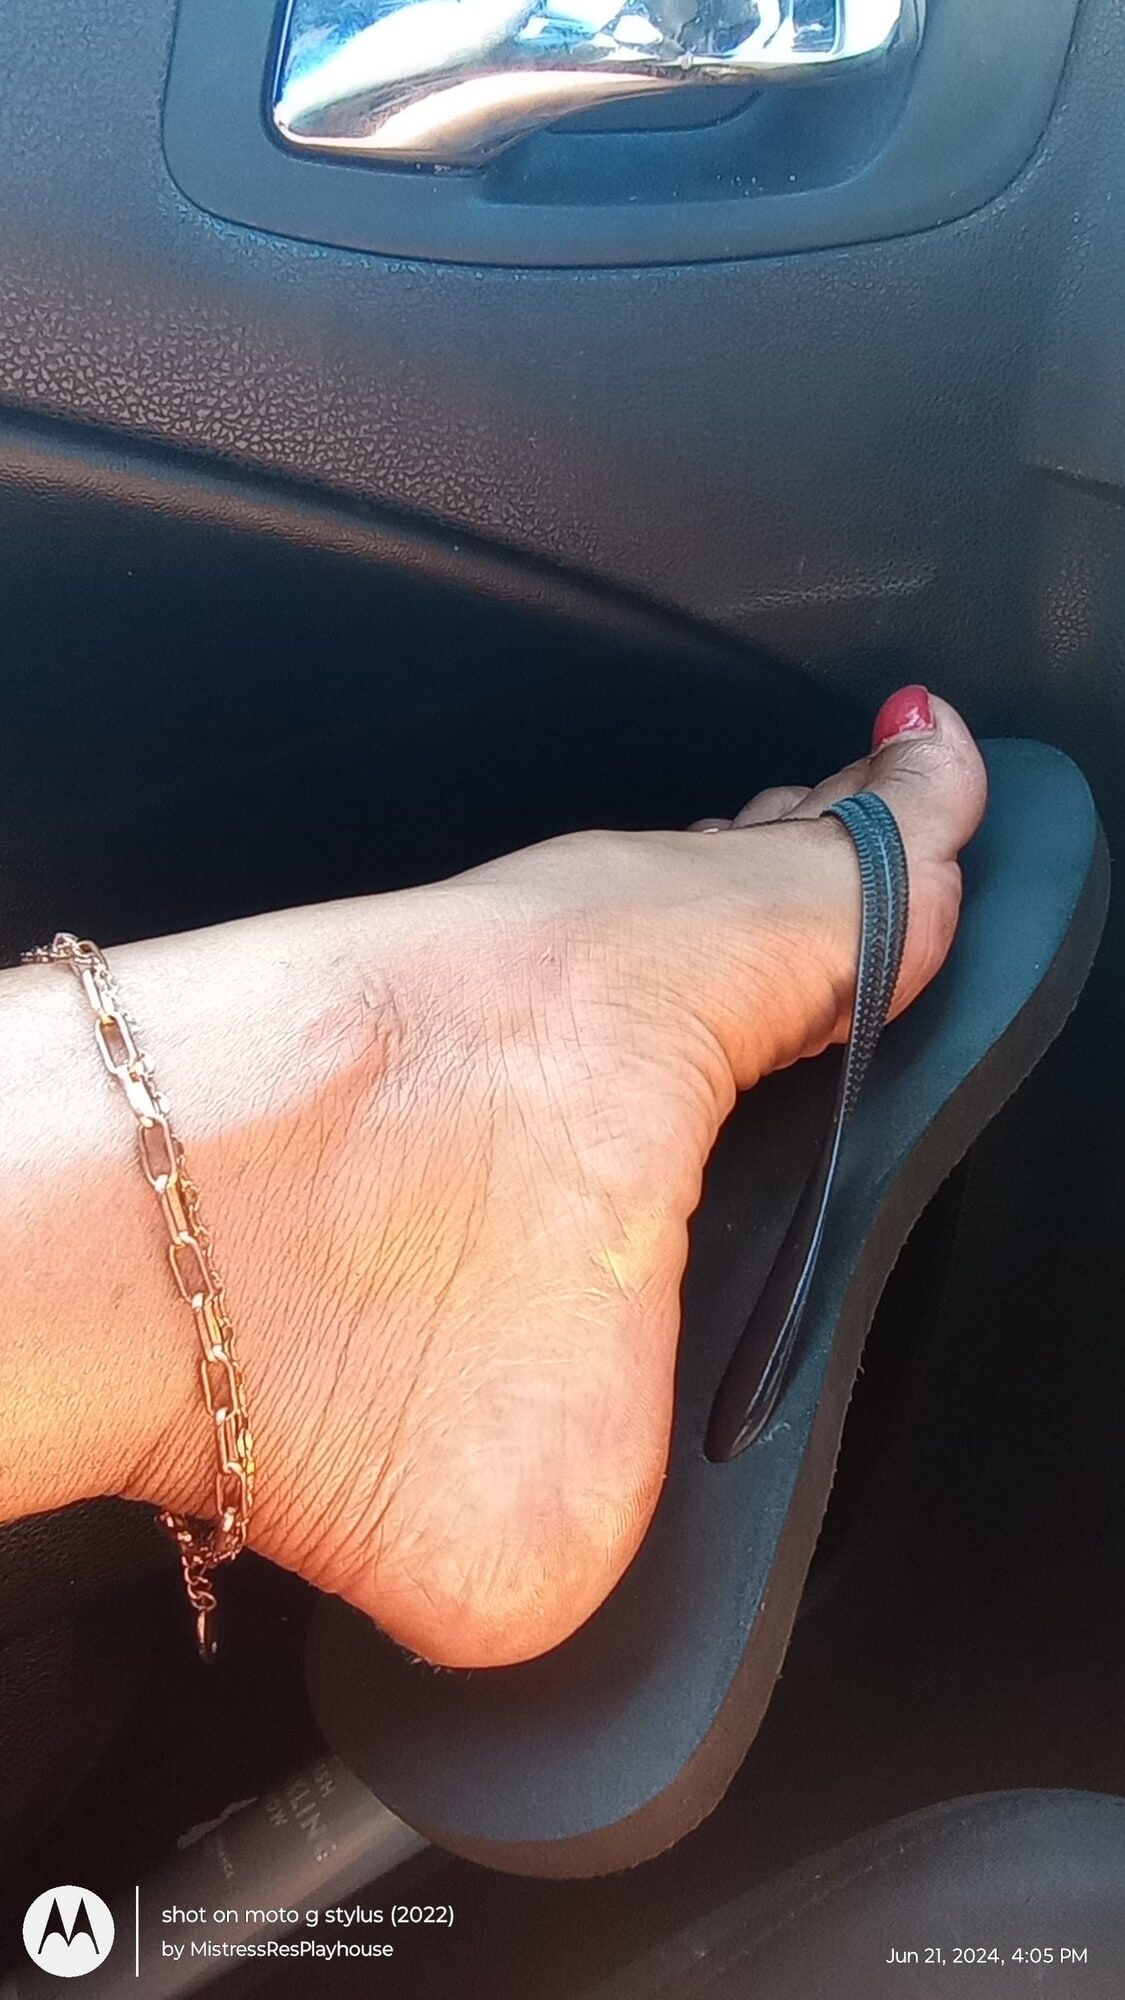 Sunny Drives: Feet and Steering Wheel Moments